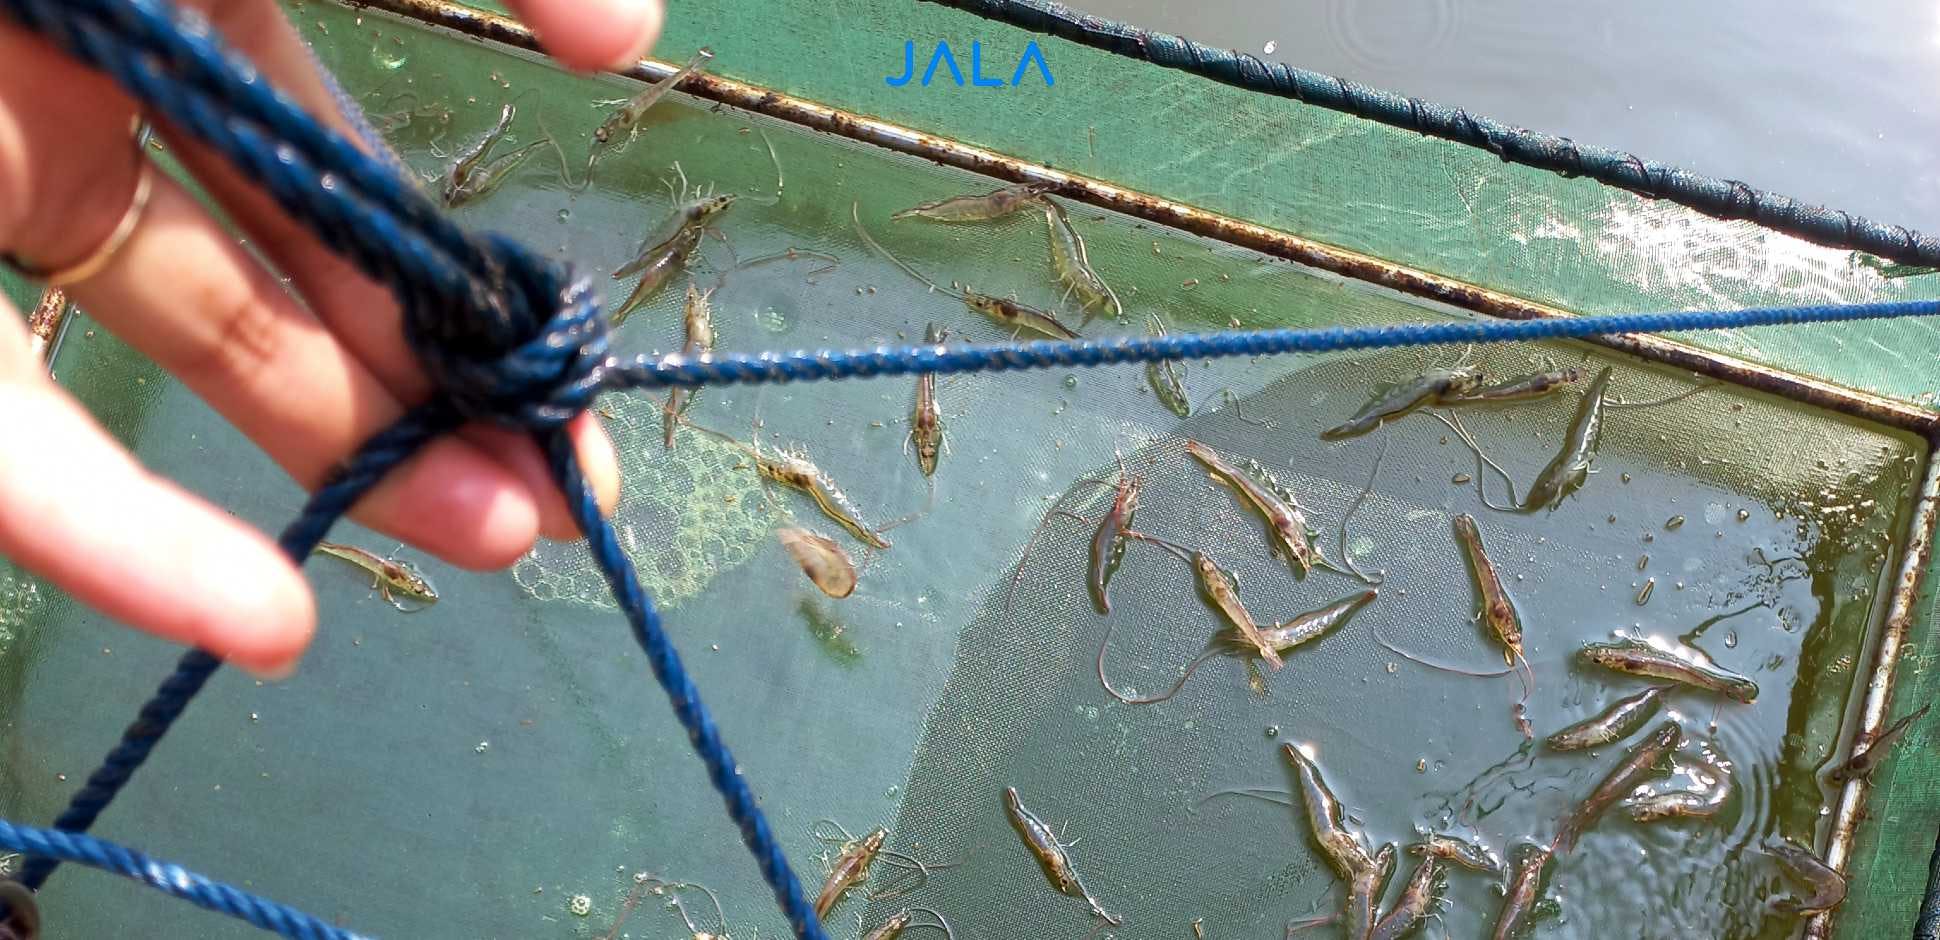 Tackle Declining Shrimp Prices Wisely Through Better Efficiency and Pond Water Management